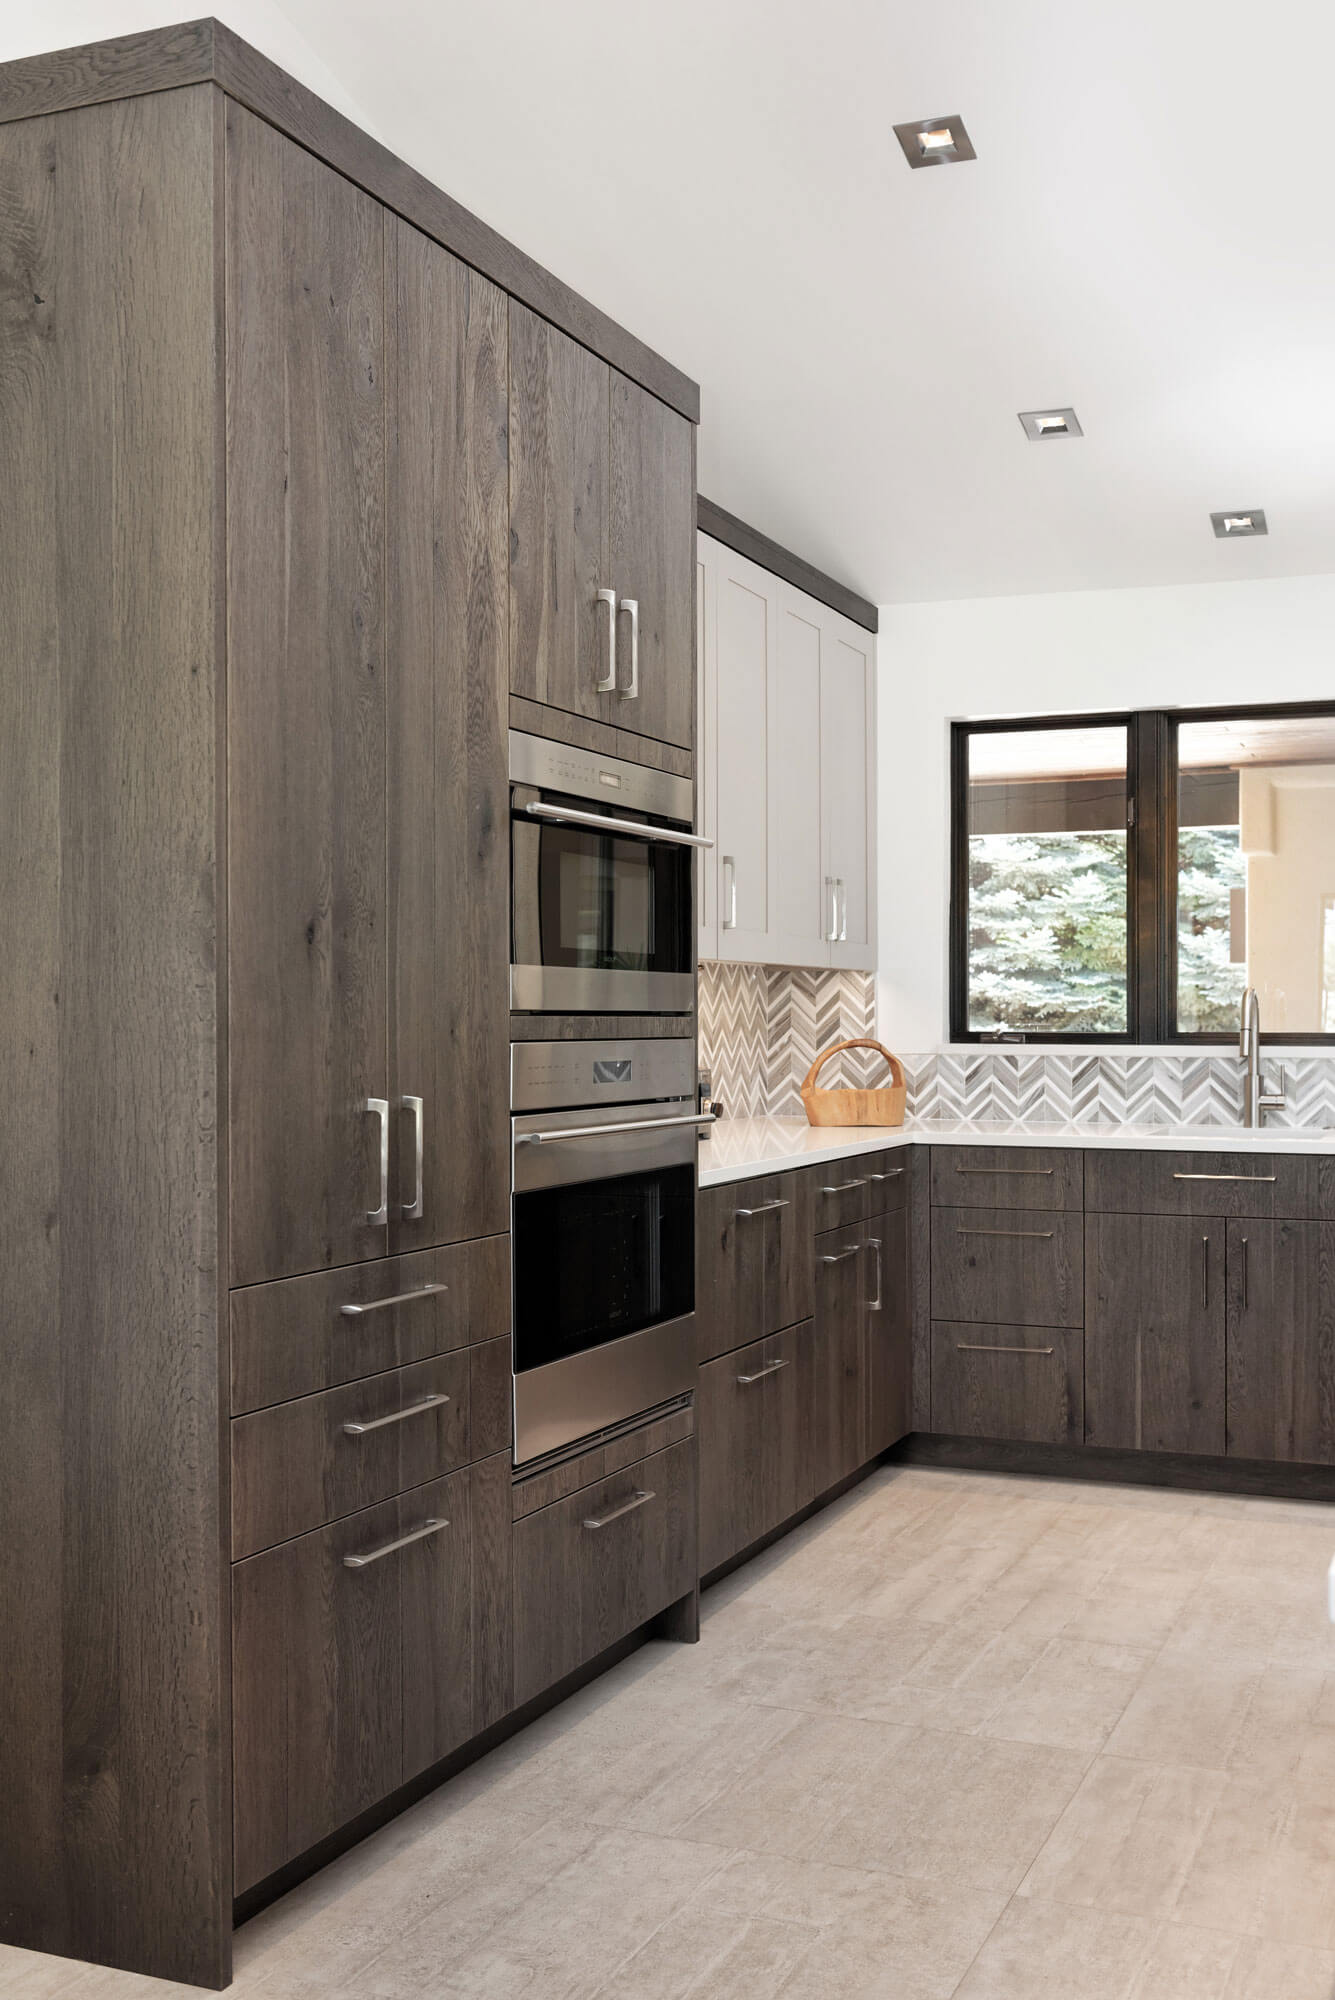 Spur Drive kitchen cabinetry